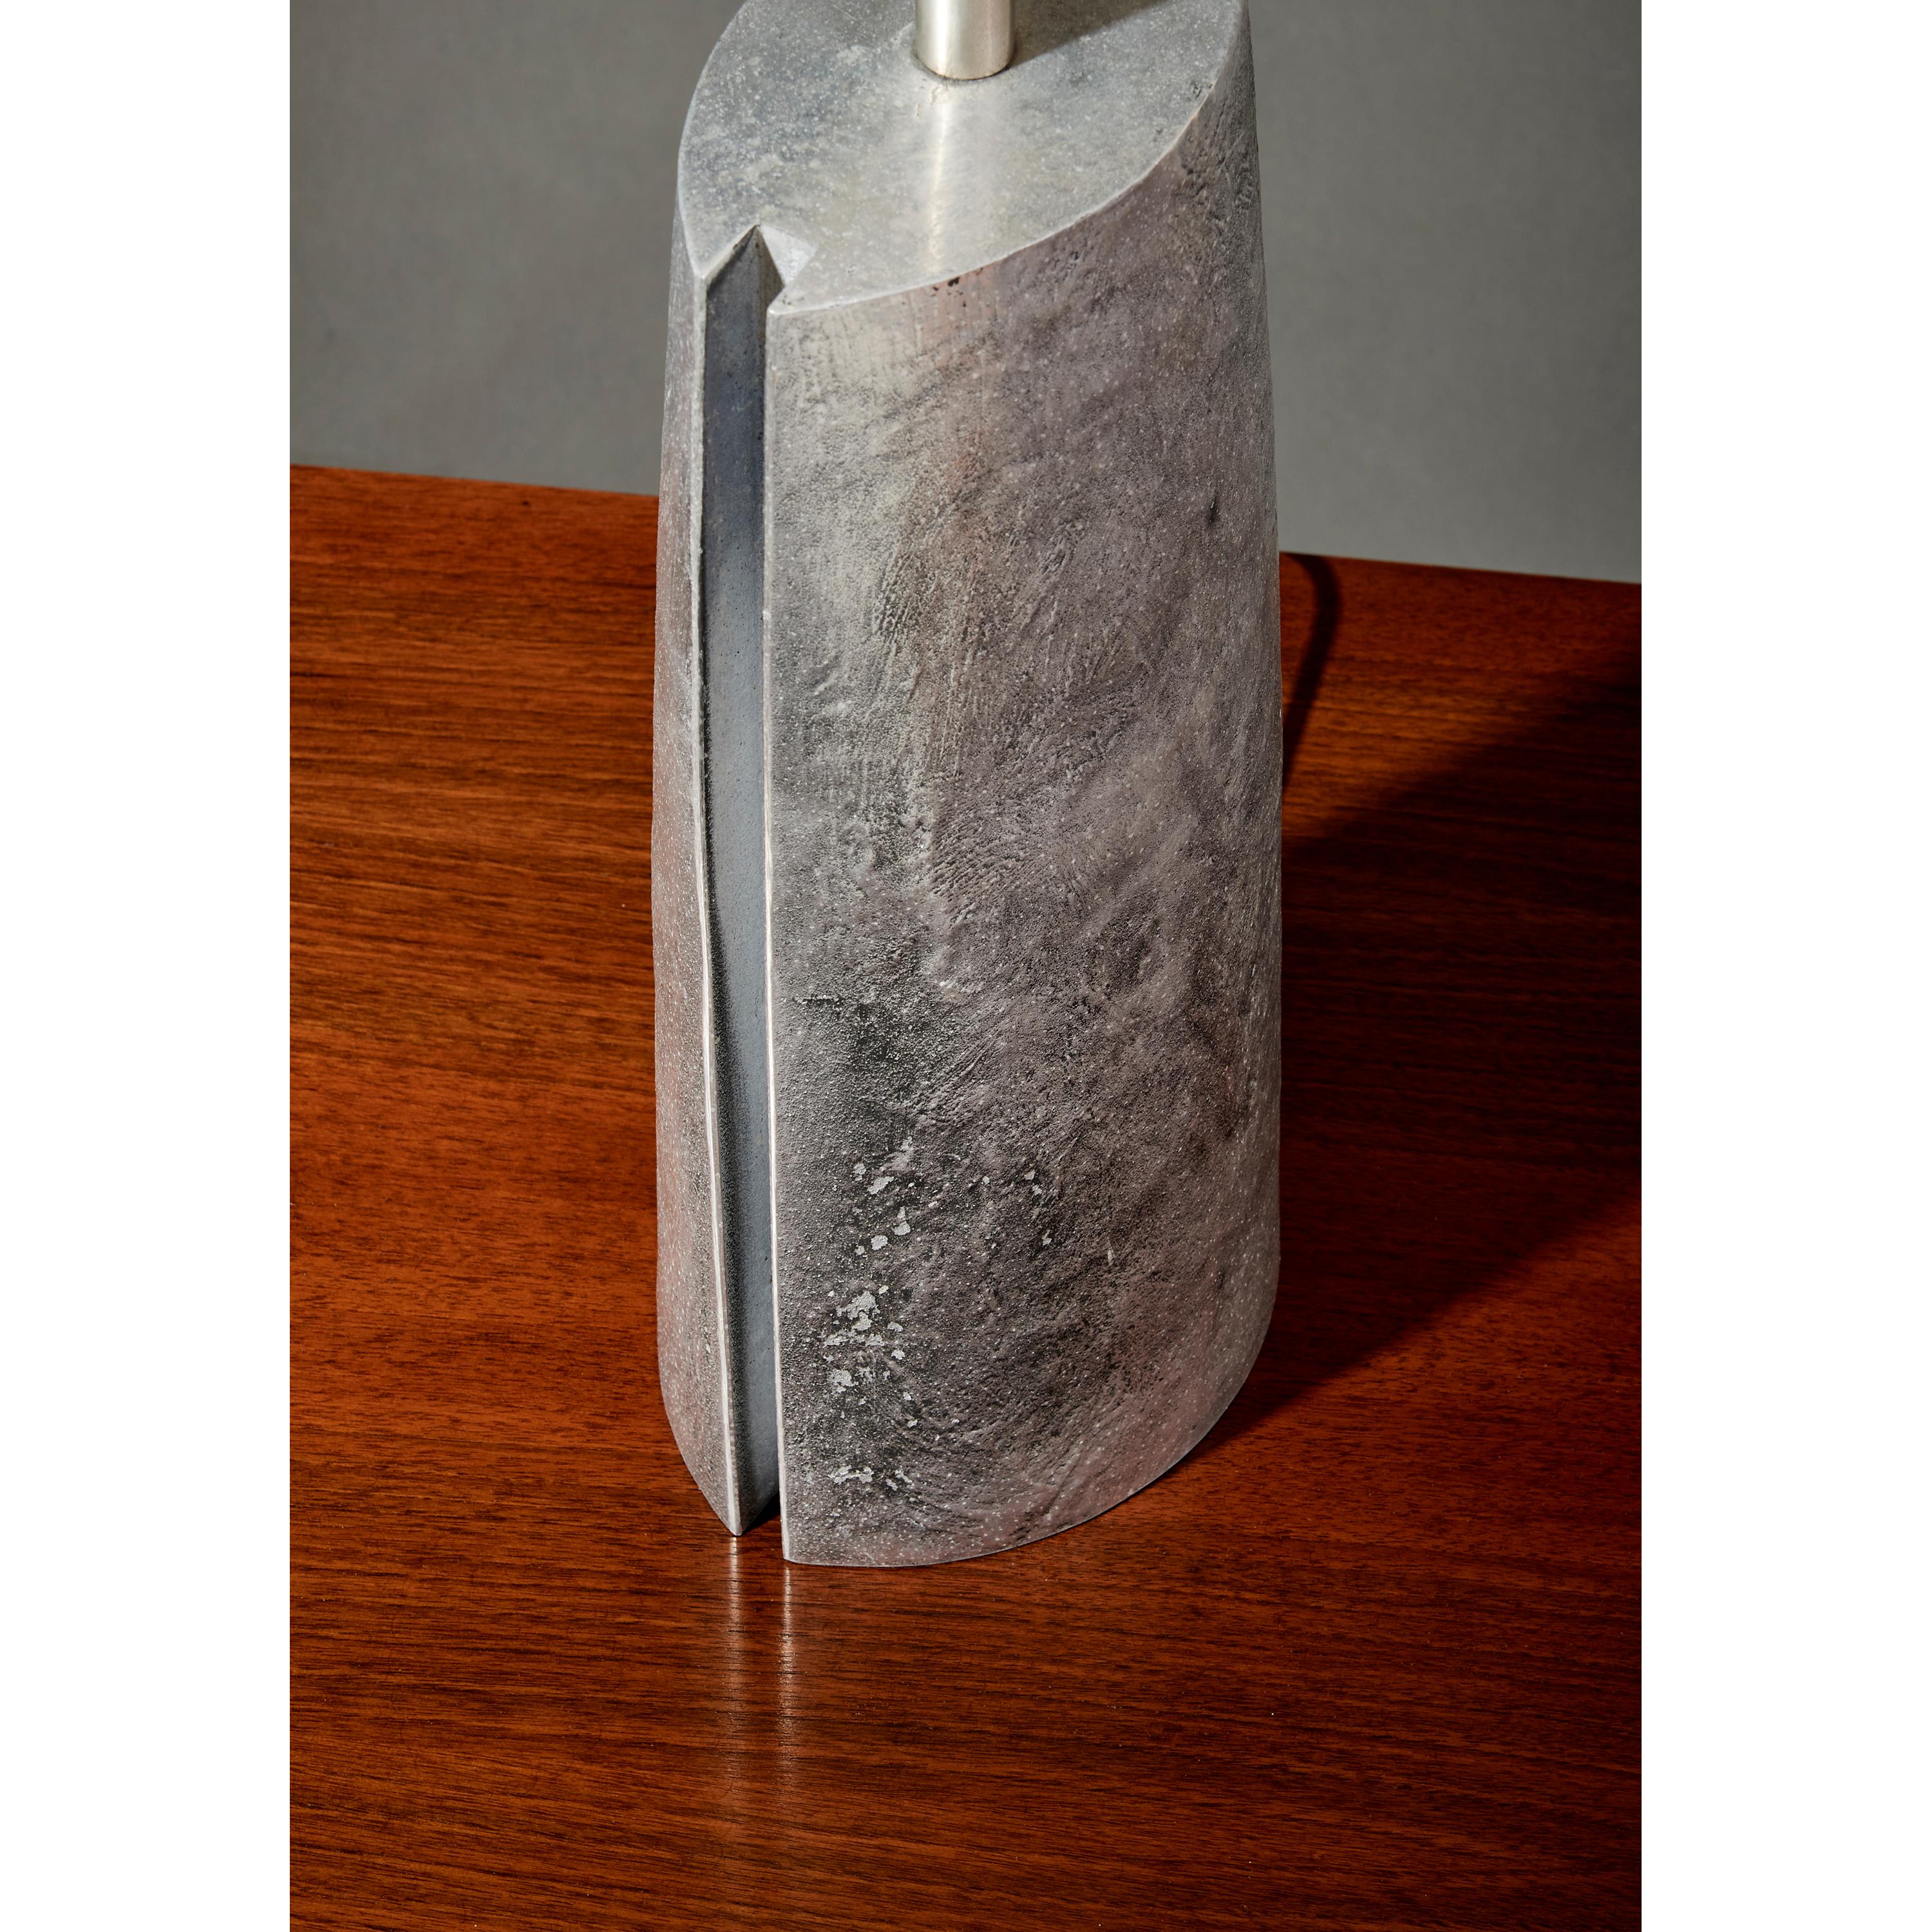 Brutalist Table Lamp in Silver Textured Aluminium with Black Shade, Italy 1970's For Sale 1